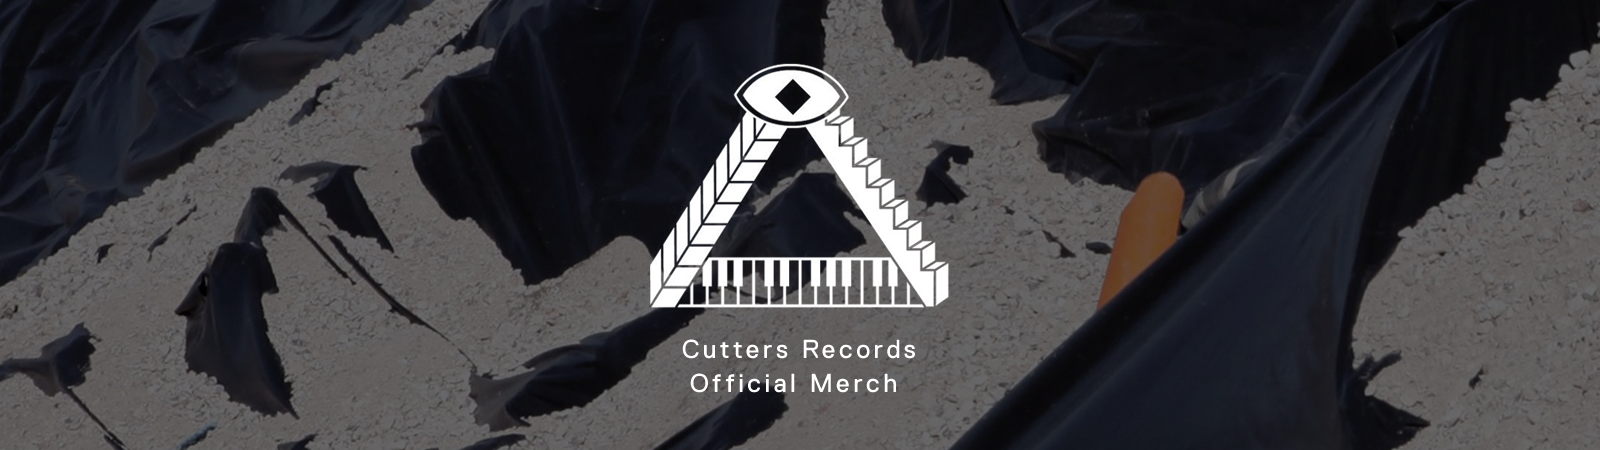 Cutters Records